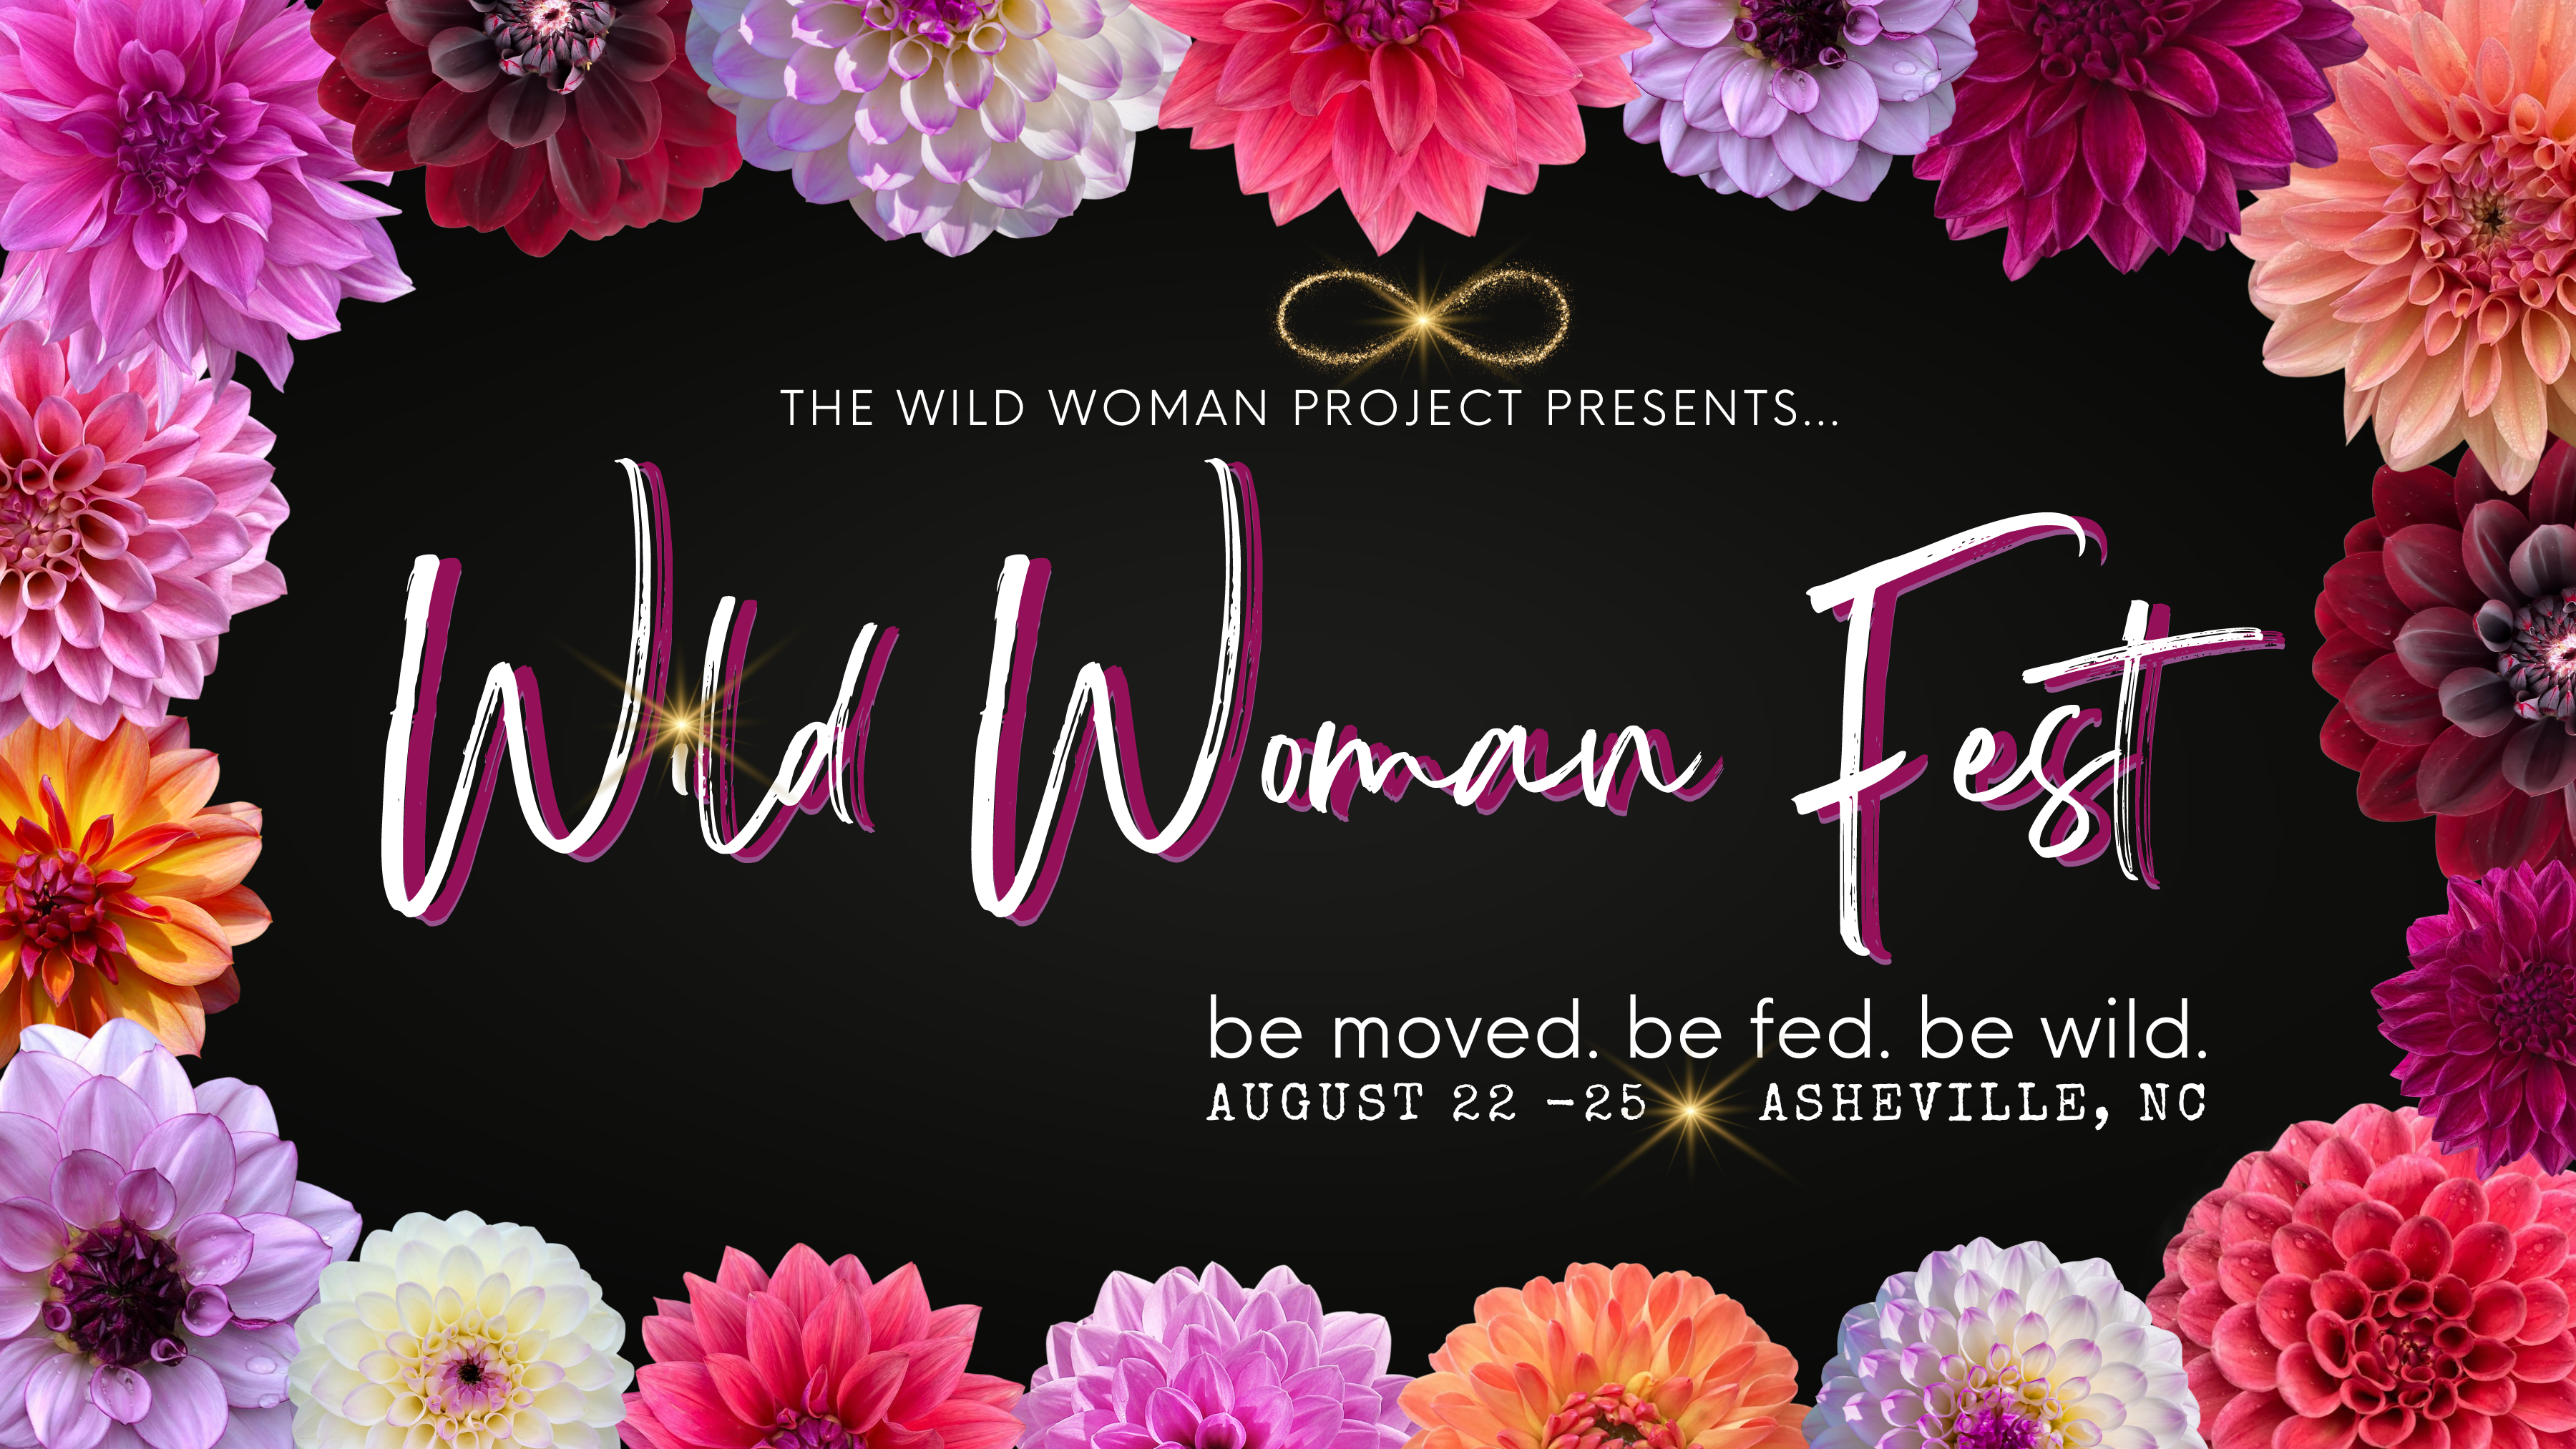 Wild Woman Fest. Be Moved. Be Fed. Be Wild